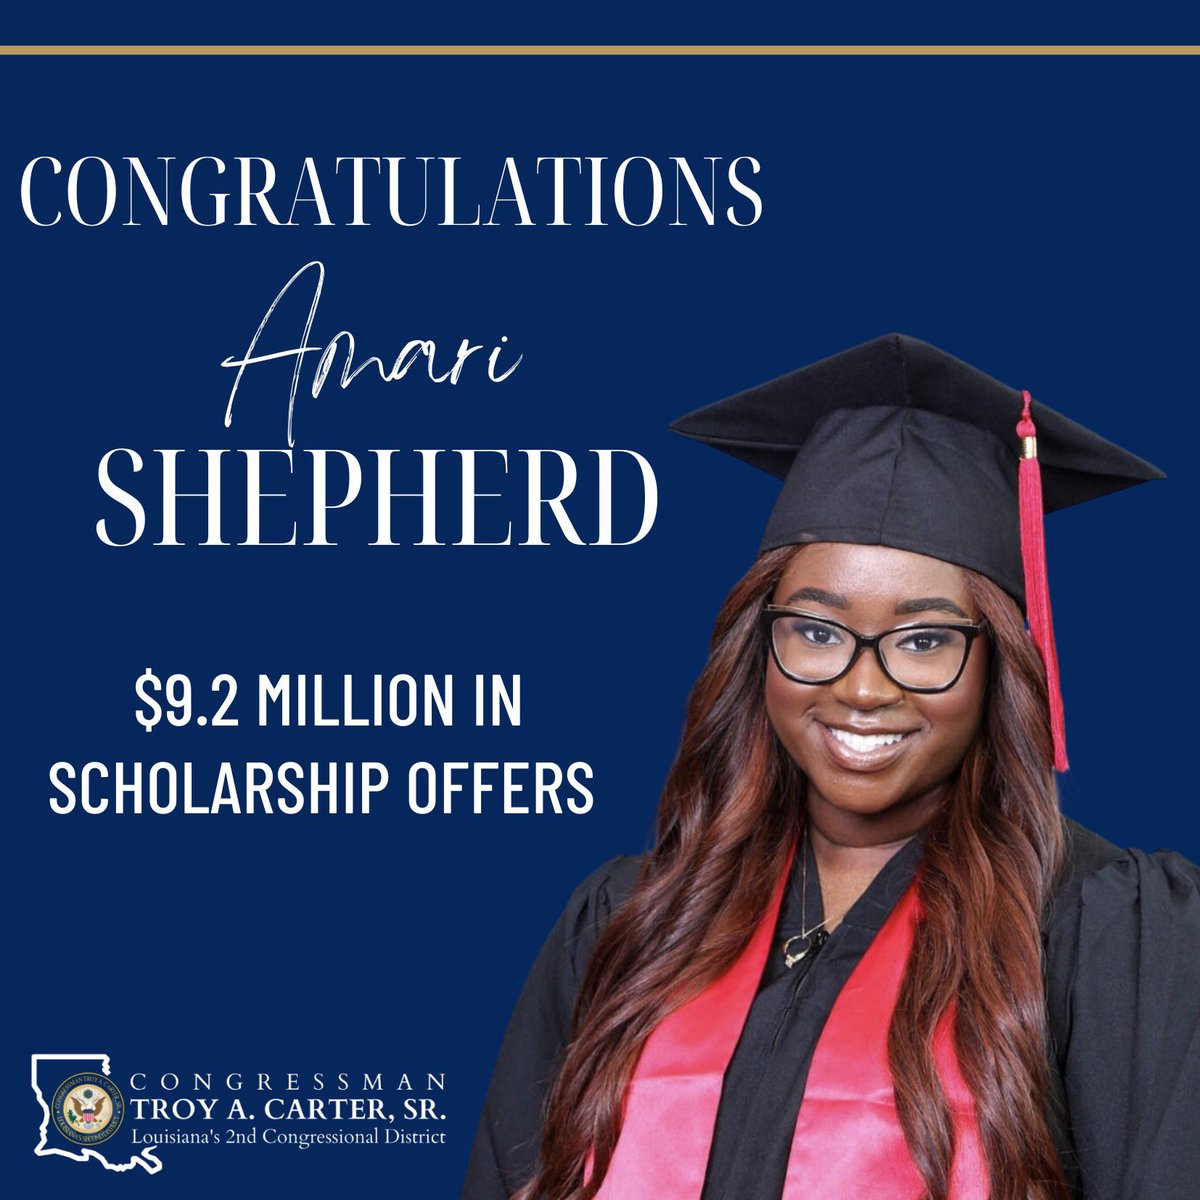 Congratulations to Amari Shepherd, 2024 #FrederickDouglass High School valedictorian on being offered $9.2 million in scholarships, including a full ride to @SpelmanCollege. Amari’s hard work and dedication is amazing, and I’m excited to see what else she accomplishes.